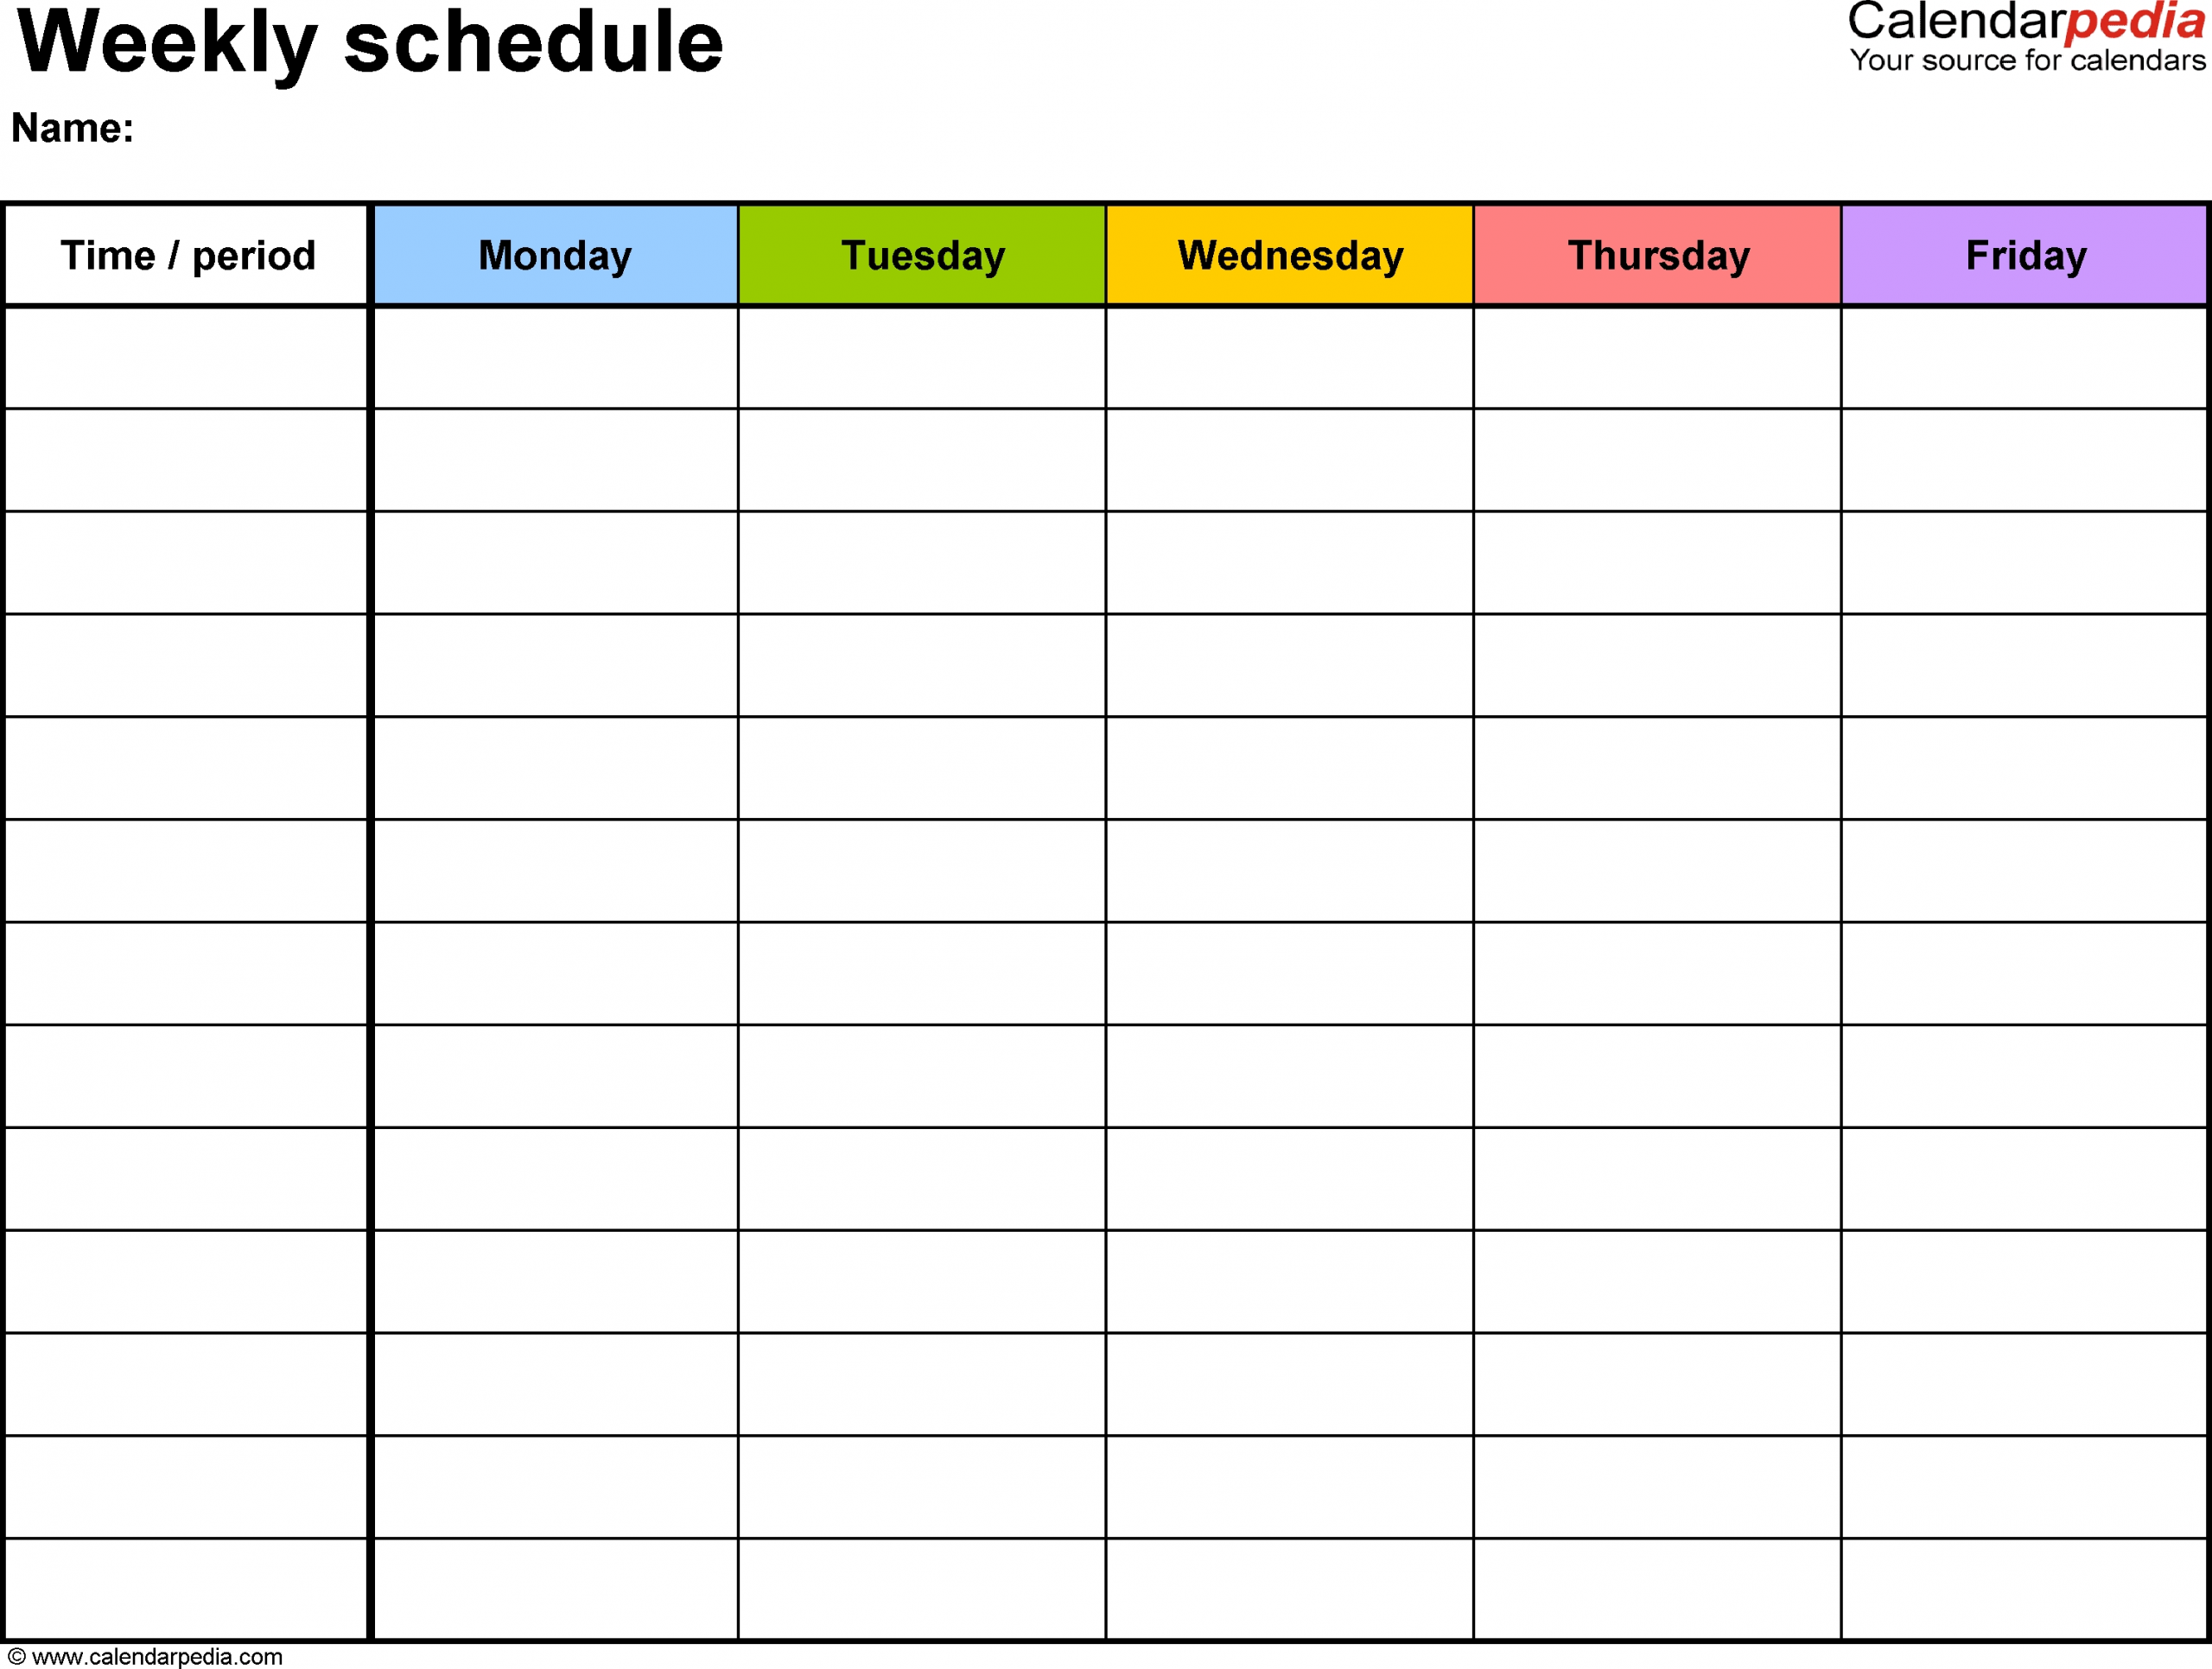 Free Weekly Schedule Templates For Word - 18 Templates pertaining to Printable Weekly Calendar Monday Through Friday